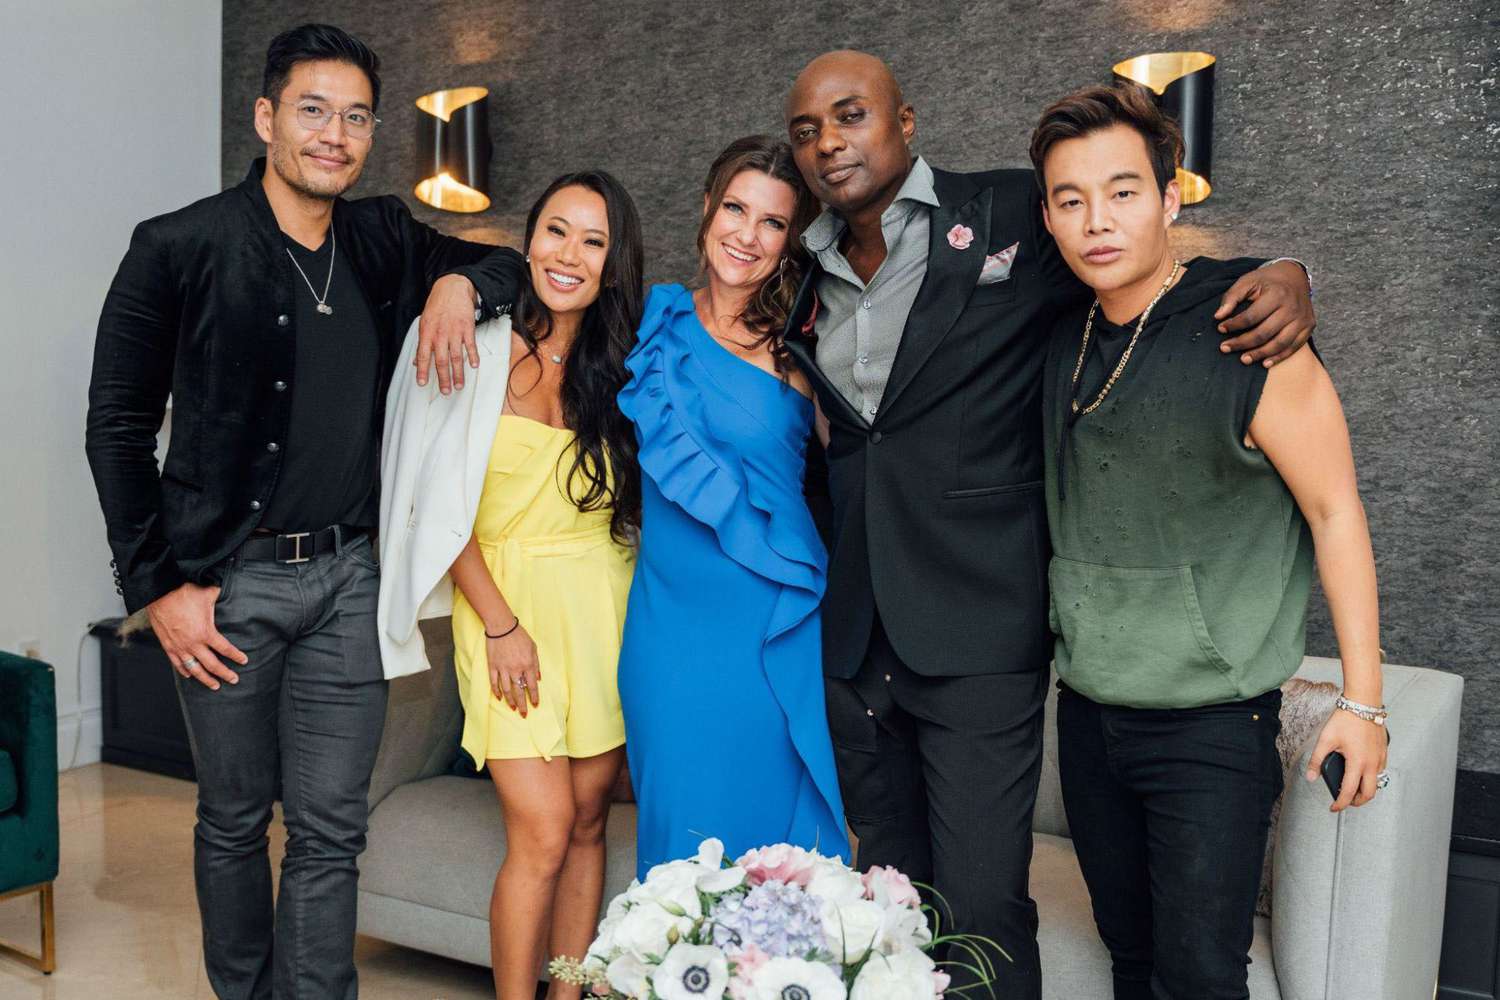 Princess Märtha Louise's 50th Birthday: Actor friends Kevin Kreider, Kelly My Li, and Kane Lim join Shaman Durek and Princess Martha Louise of Norway for the Princess's special 50th birthday celebration in Shaman Durek’s Beverly Hills home.